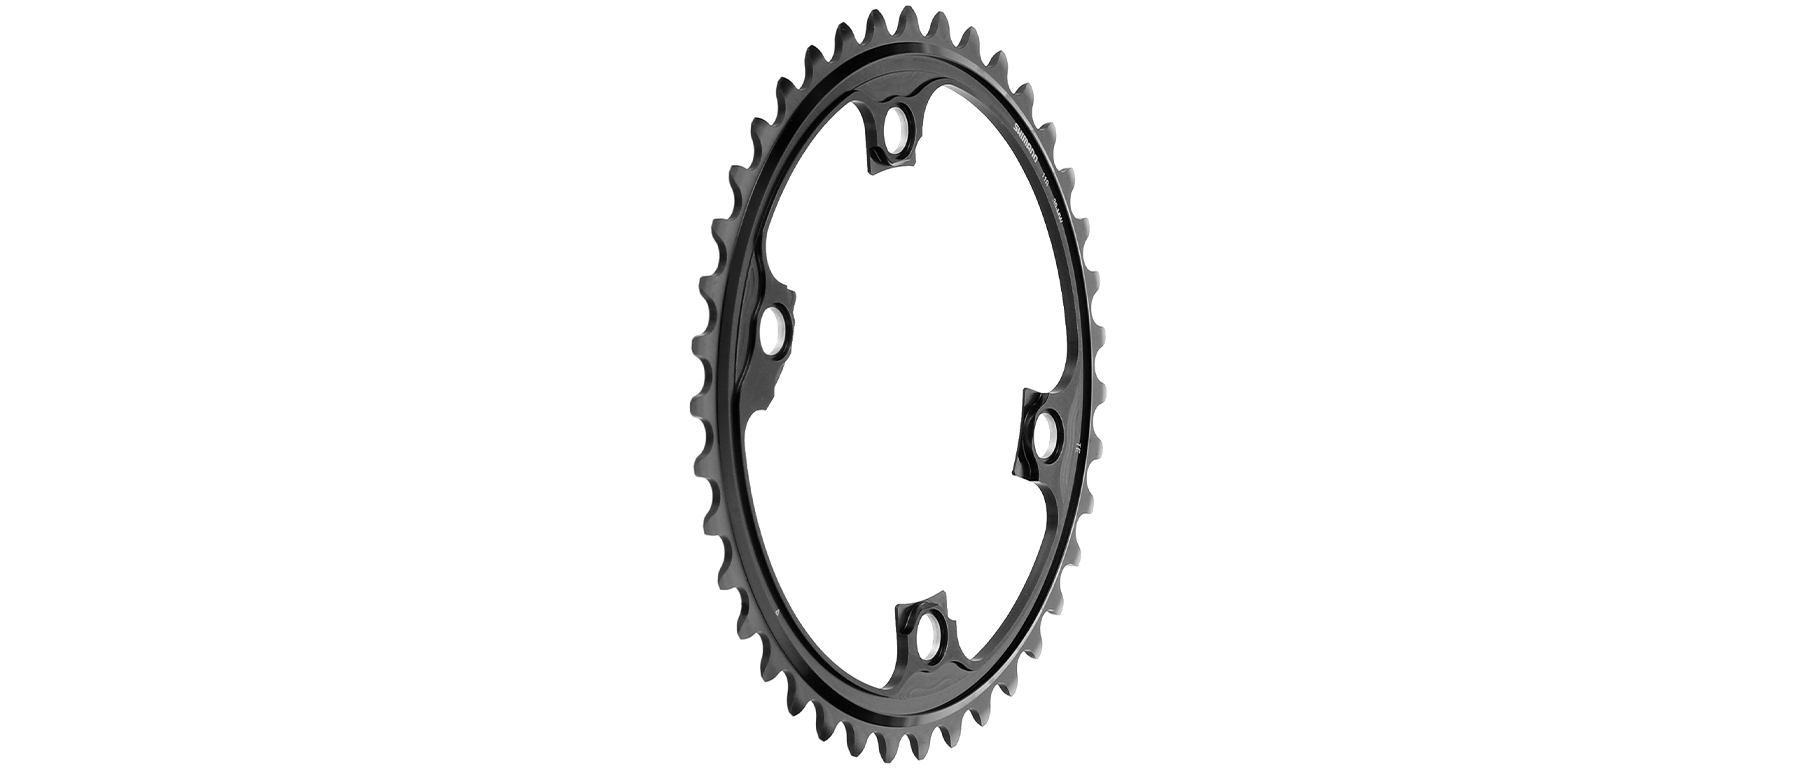 Shimano Dura-Ace FC-9100 Inner Chainring